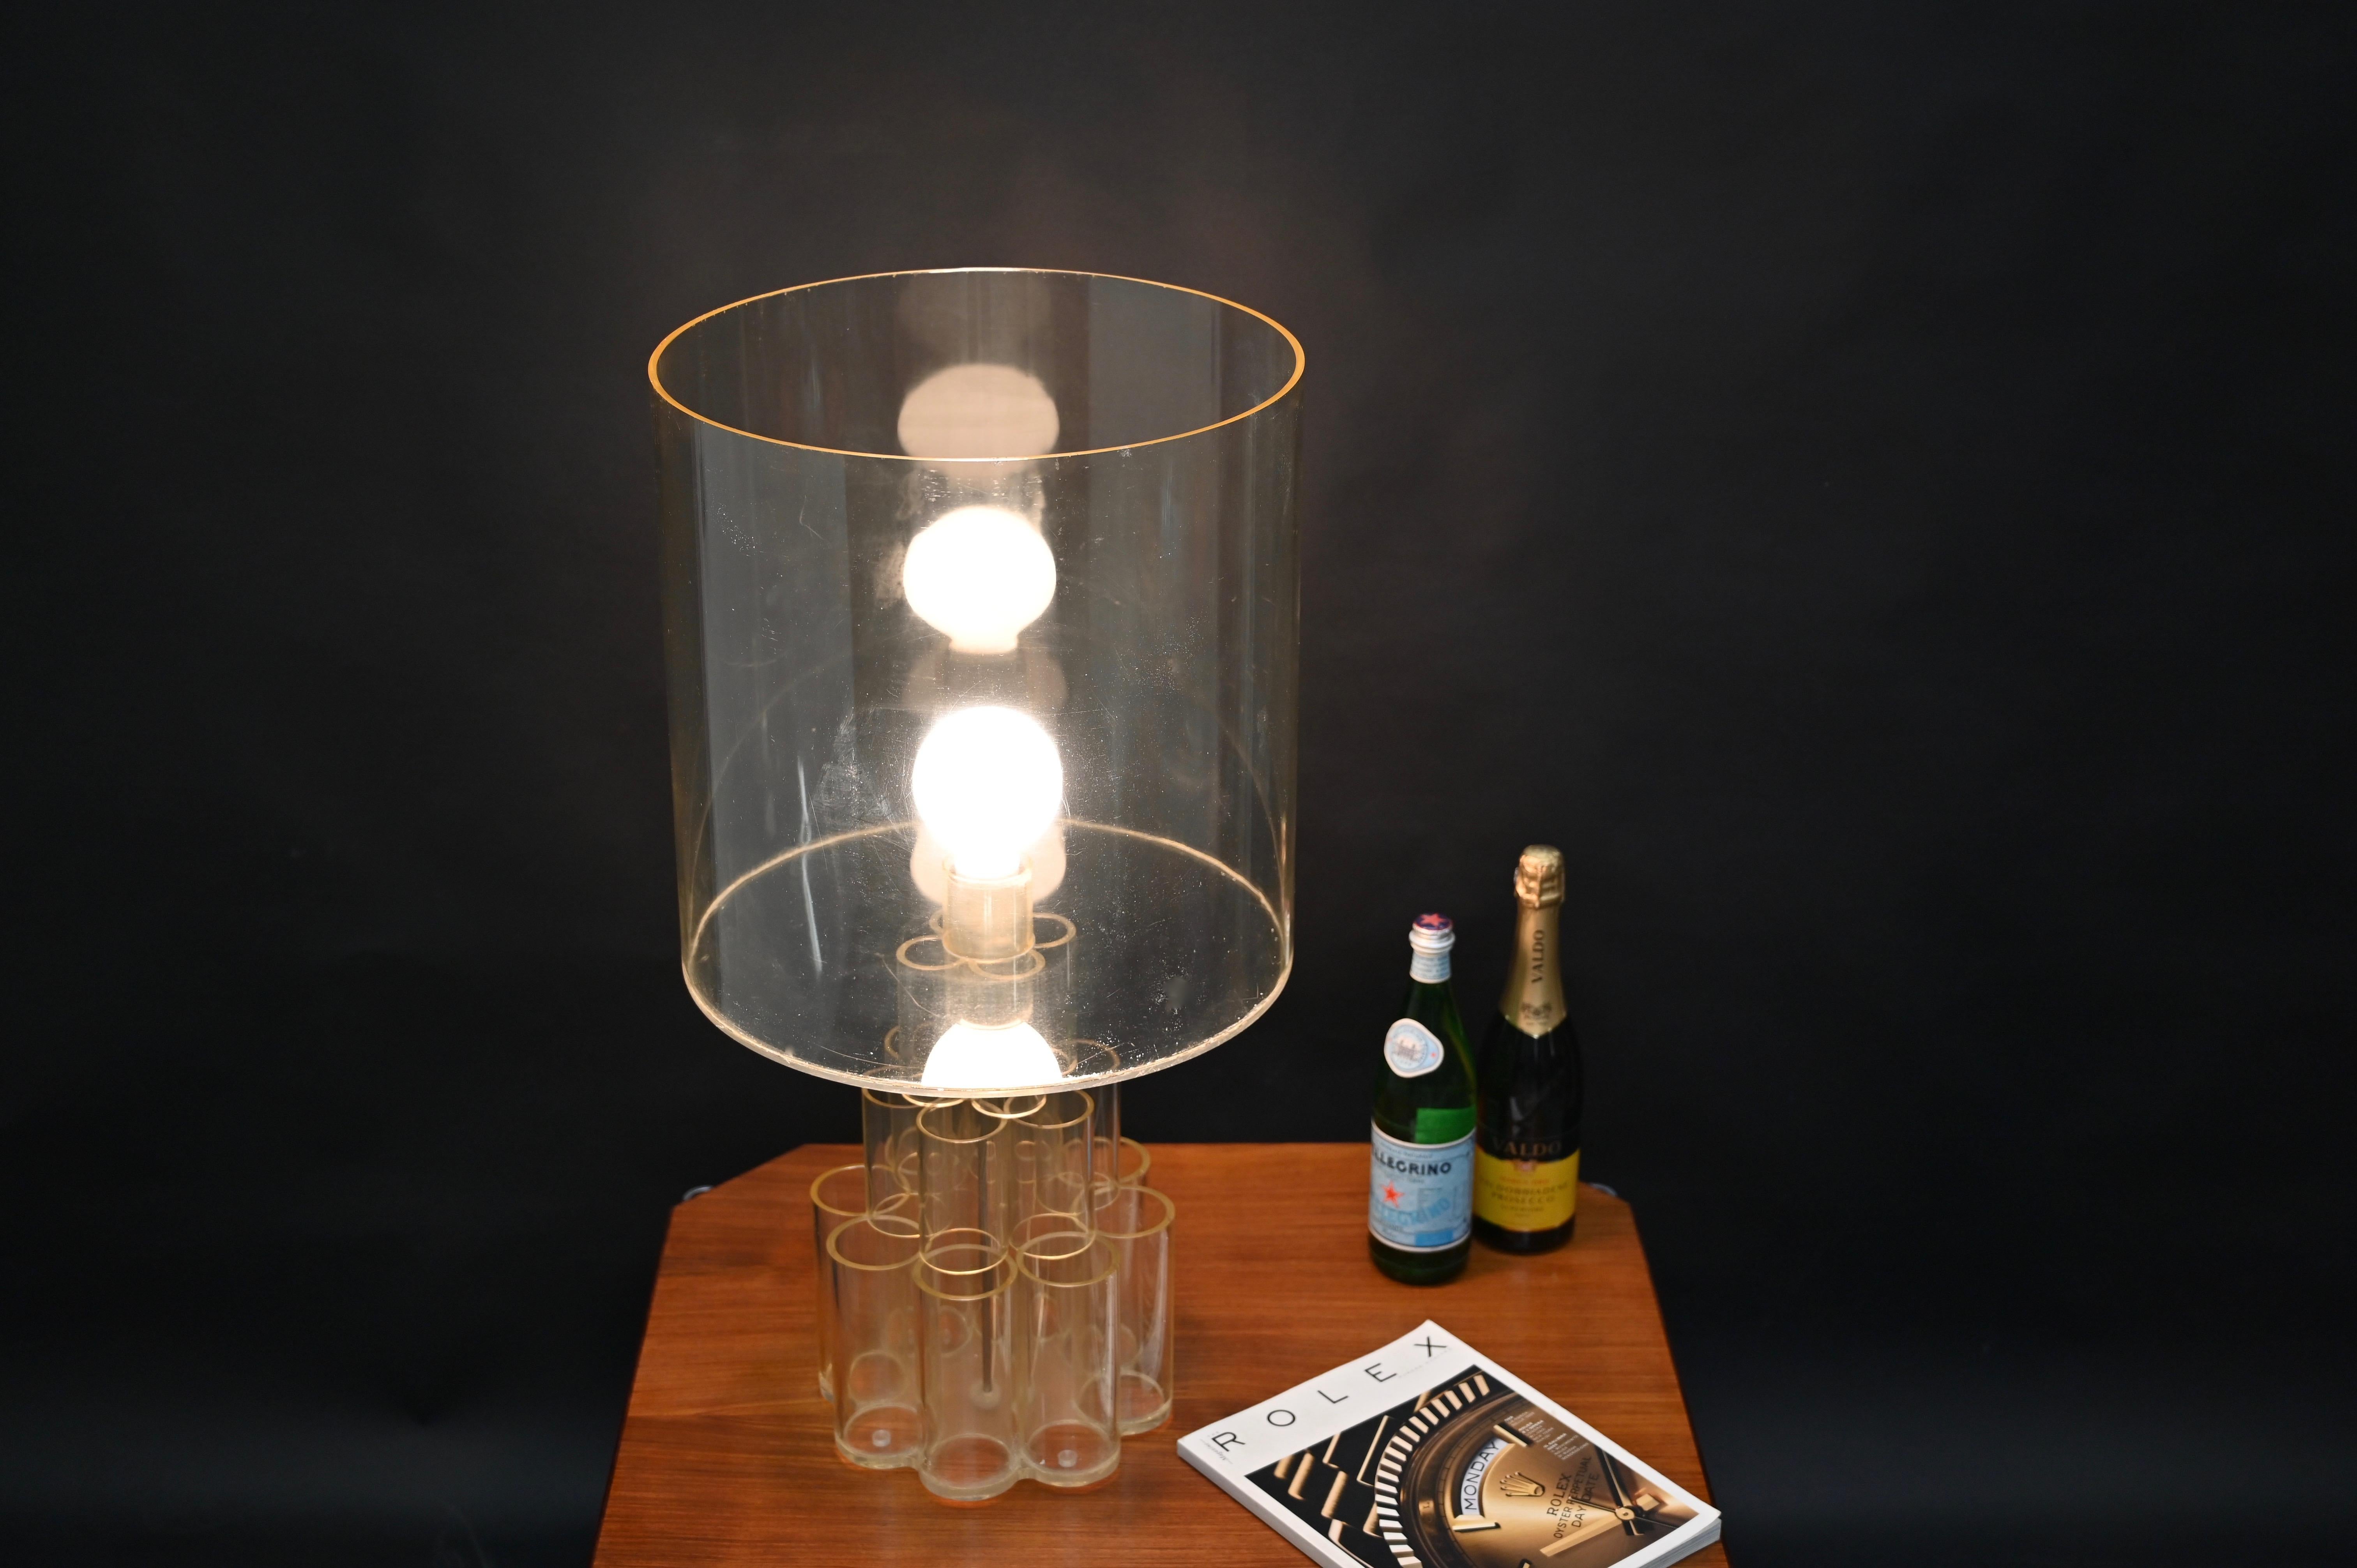 20th Century Mid-Century Modern Table Lamp in Lucite Plexiglass, Panton Style, Italy, 1970s For Sale